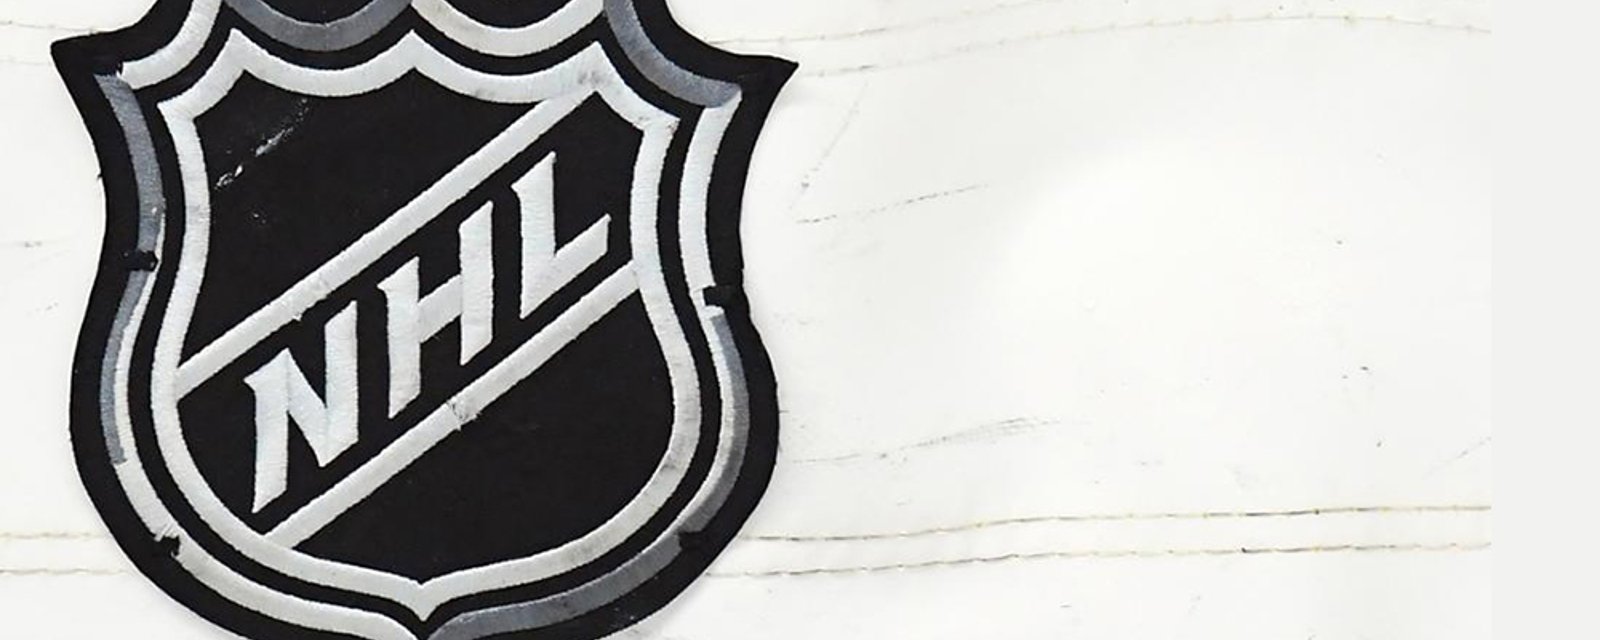 NHL hopes to run “training camp period” starting April 29th